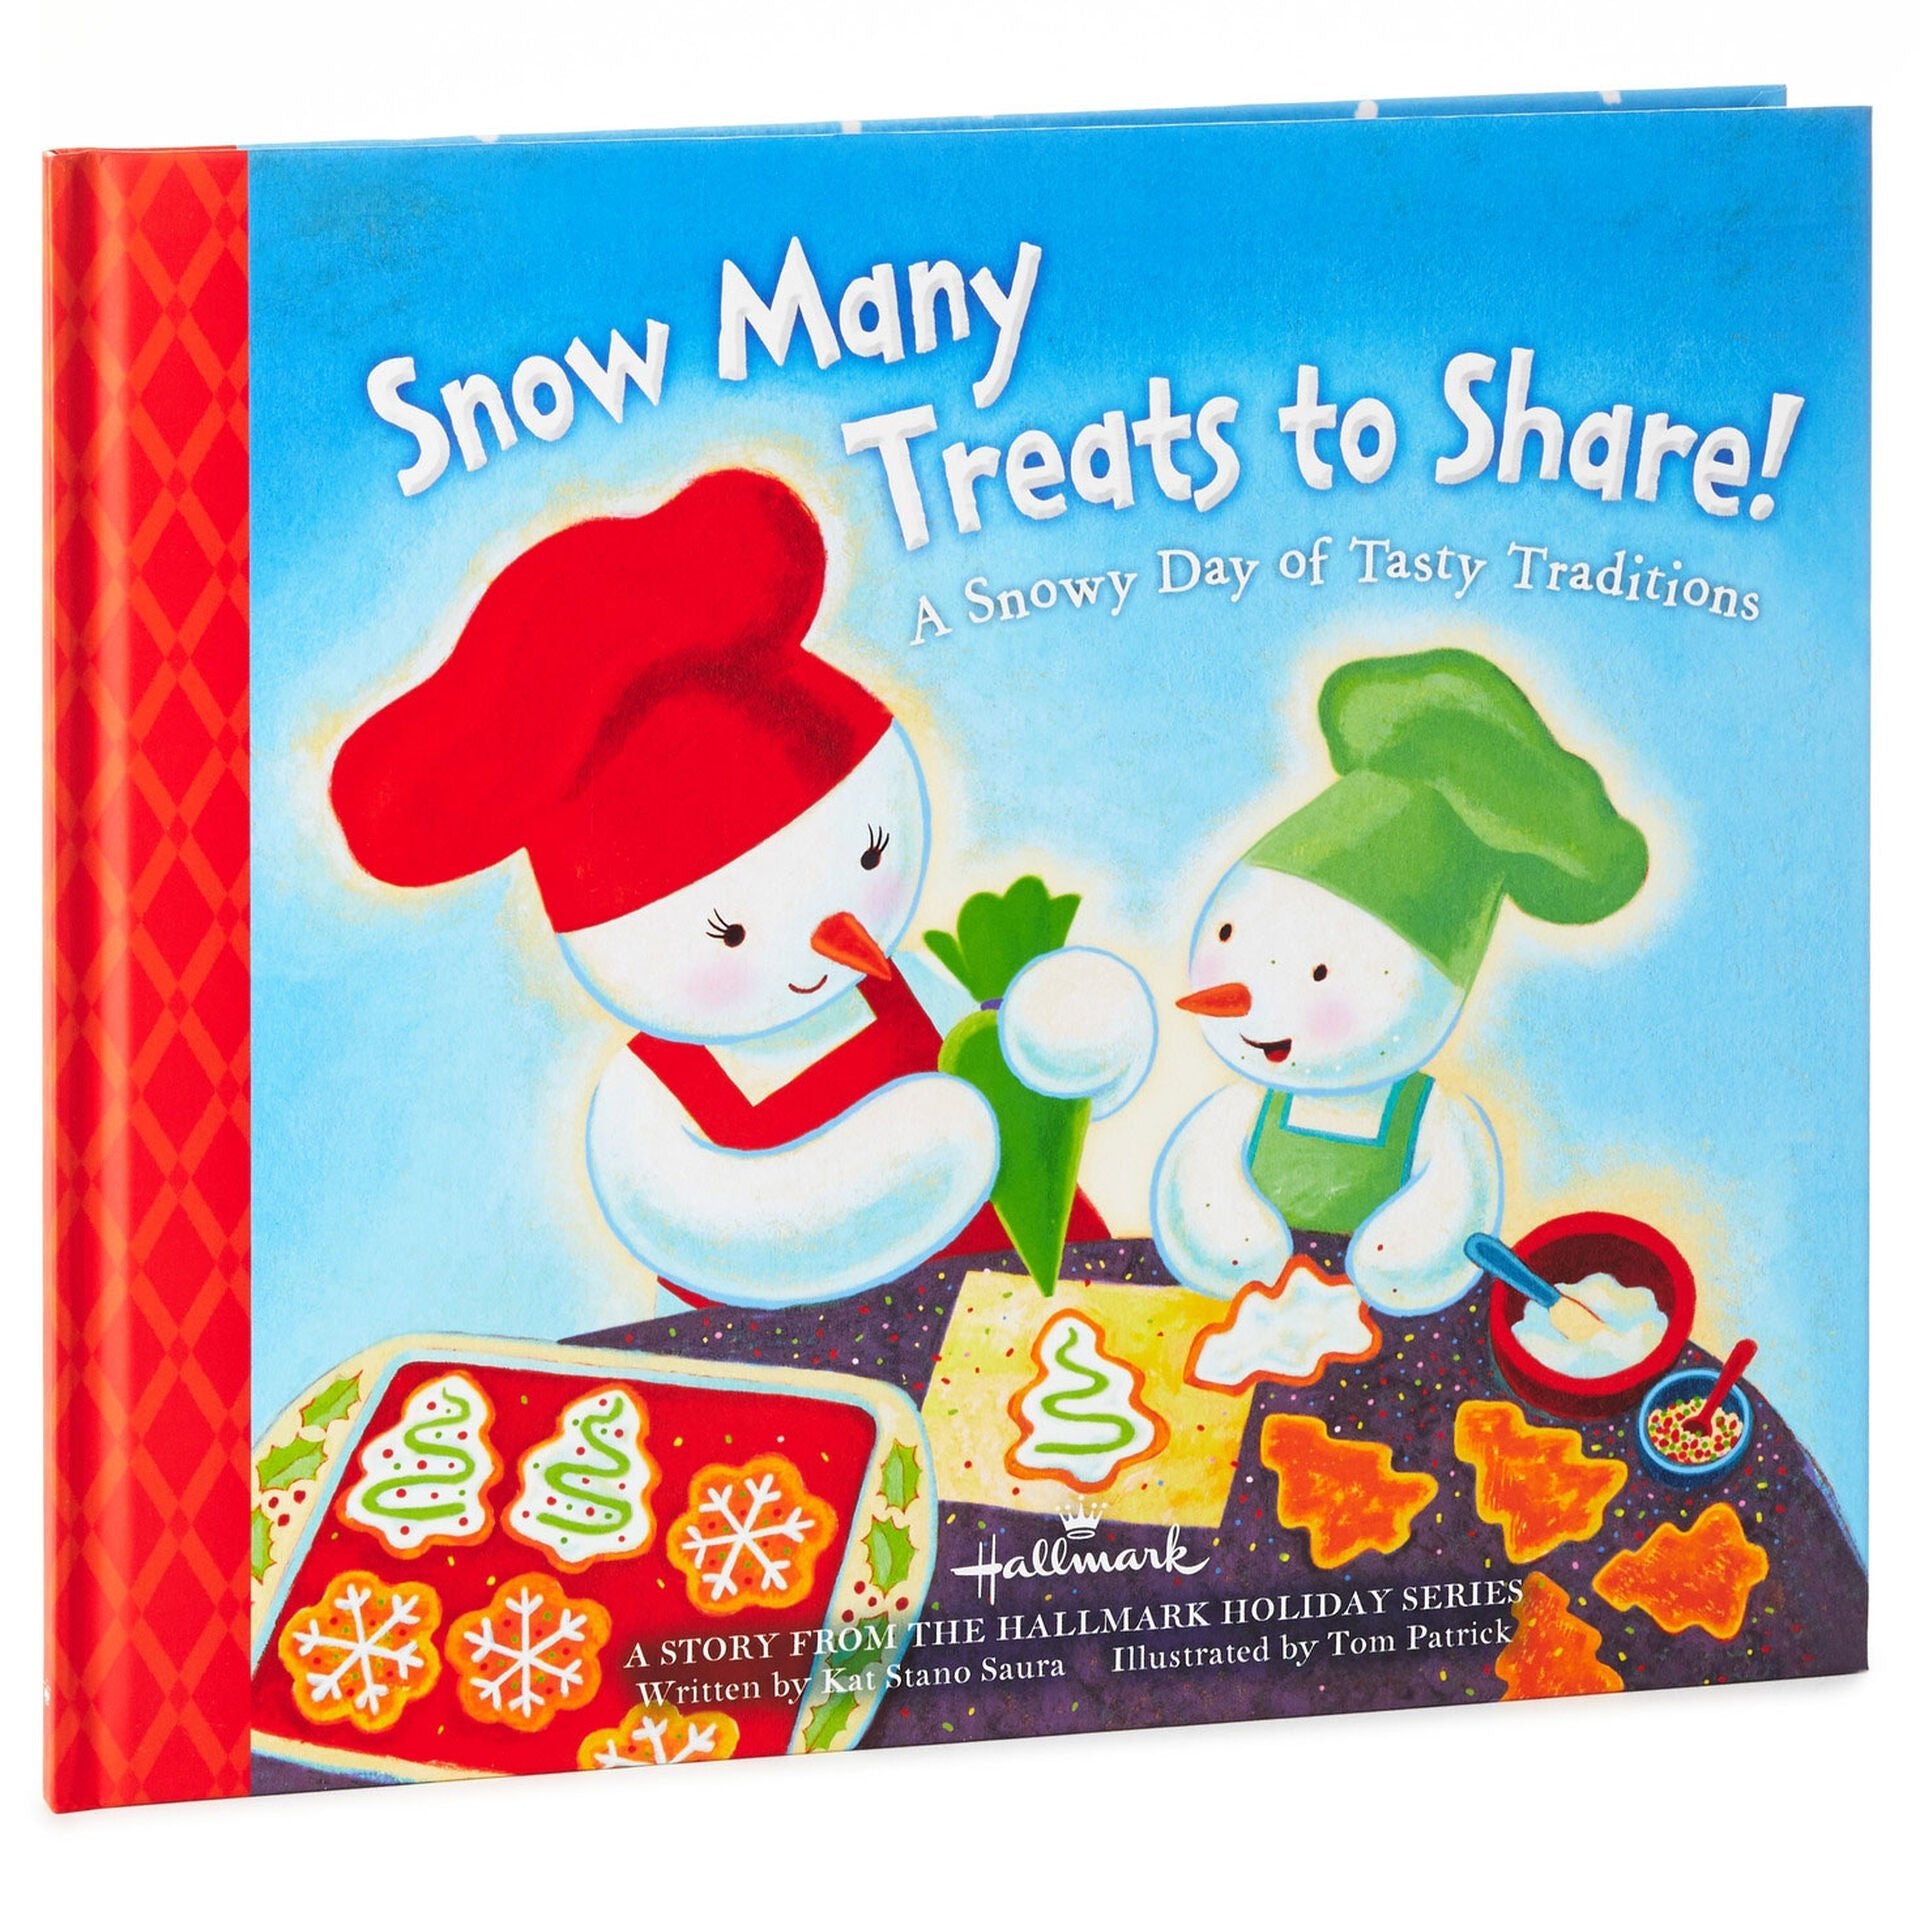 Snow Many Treats to Share!: A Snowy Day of Tasty Traditions Book